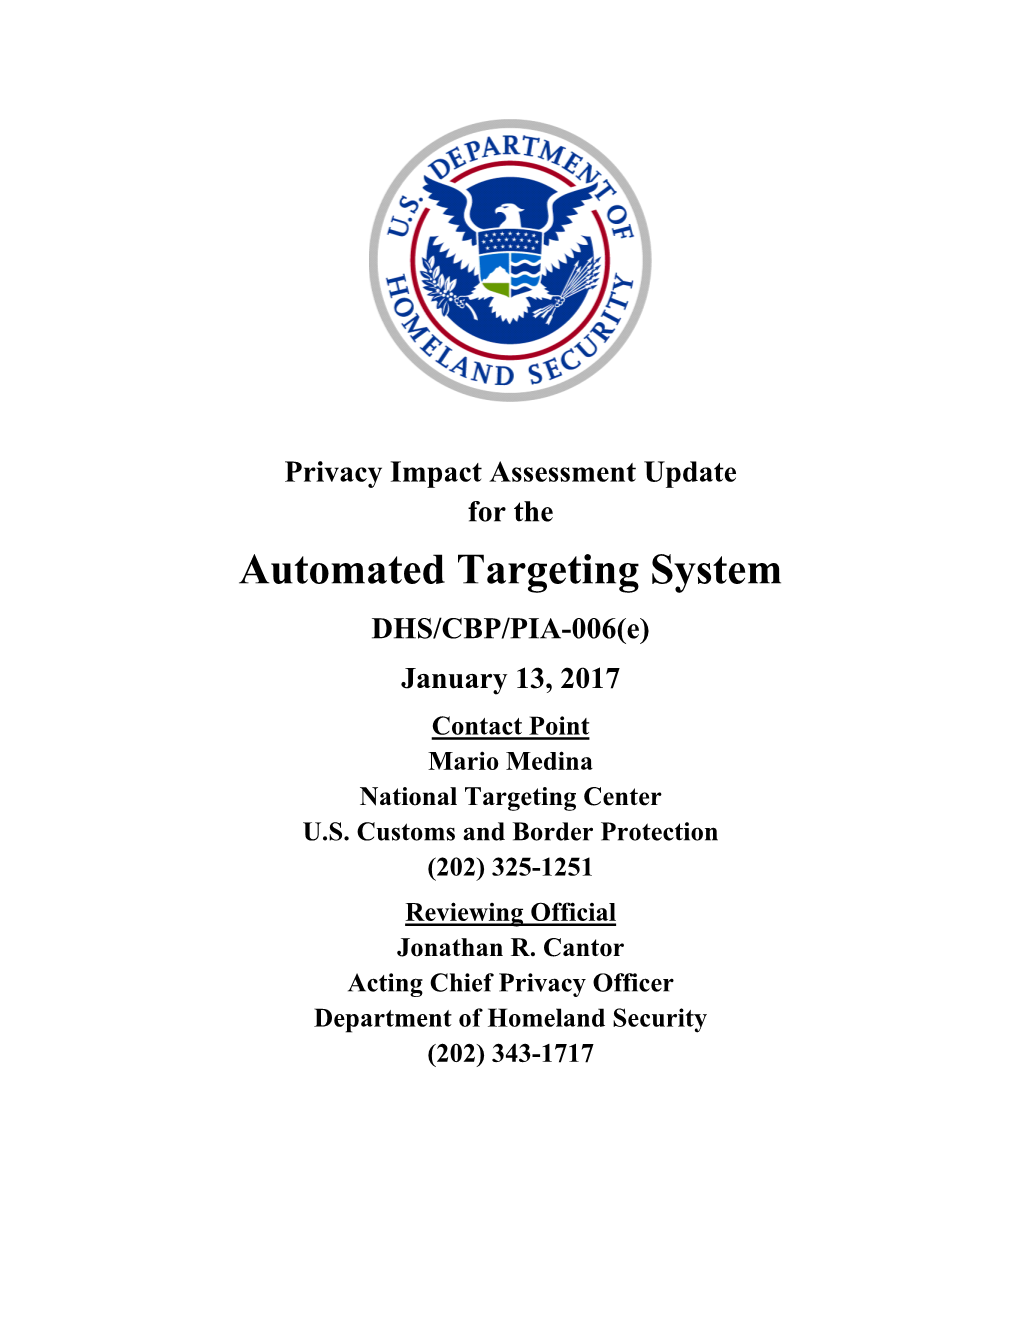 DHS/CBP/PIA-006(E) Automated Targeting System Page 1